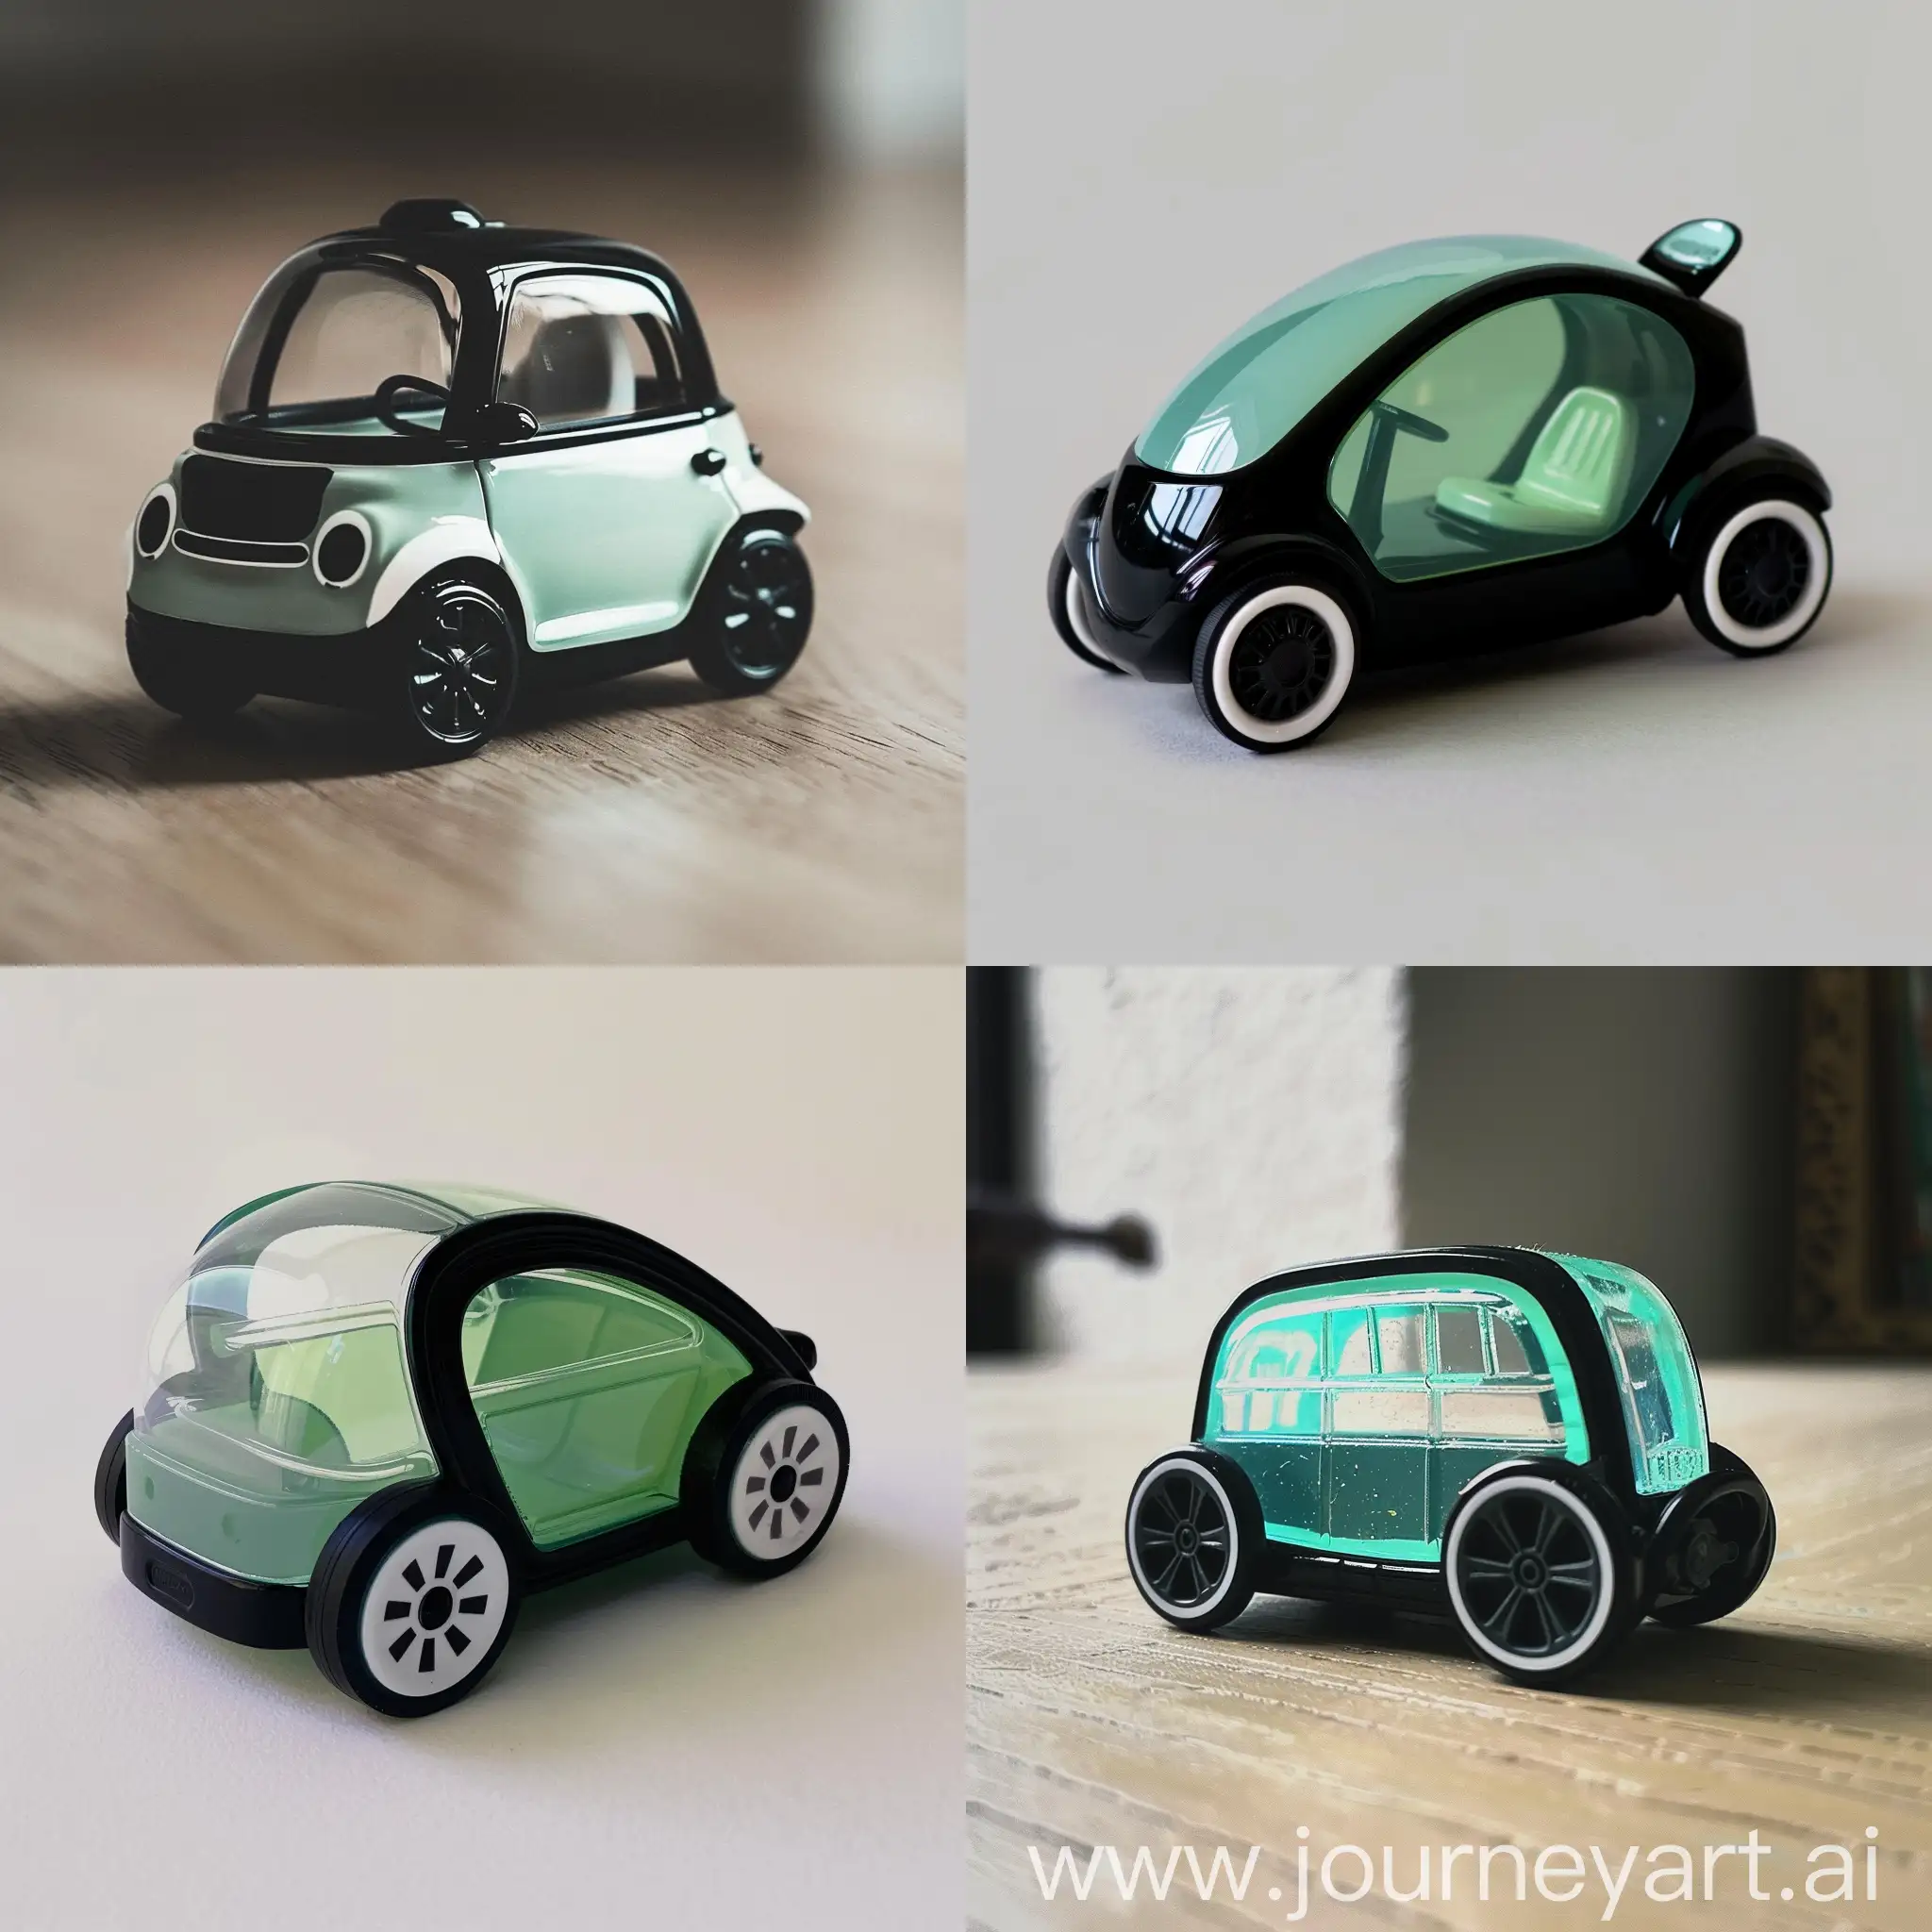 Generate image of tiny toy car, black bottom ,upper body transparent green ,tyres in front fully black and back tyres are white tyres with black border,car is 2 seater